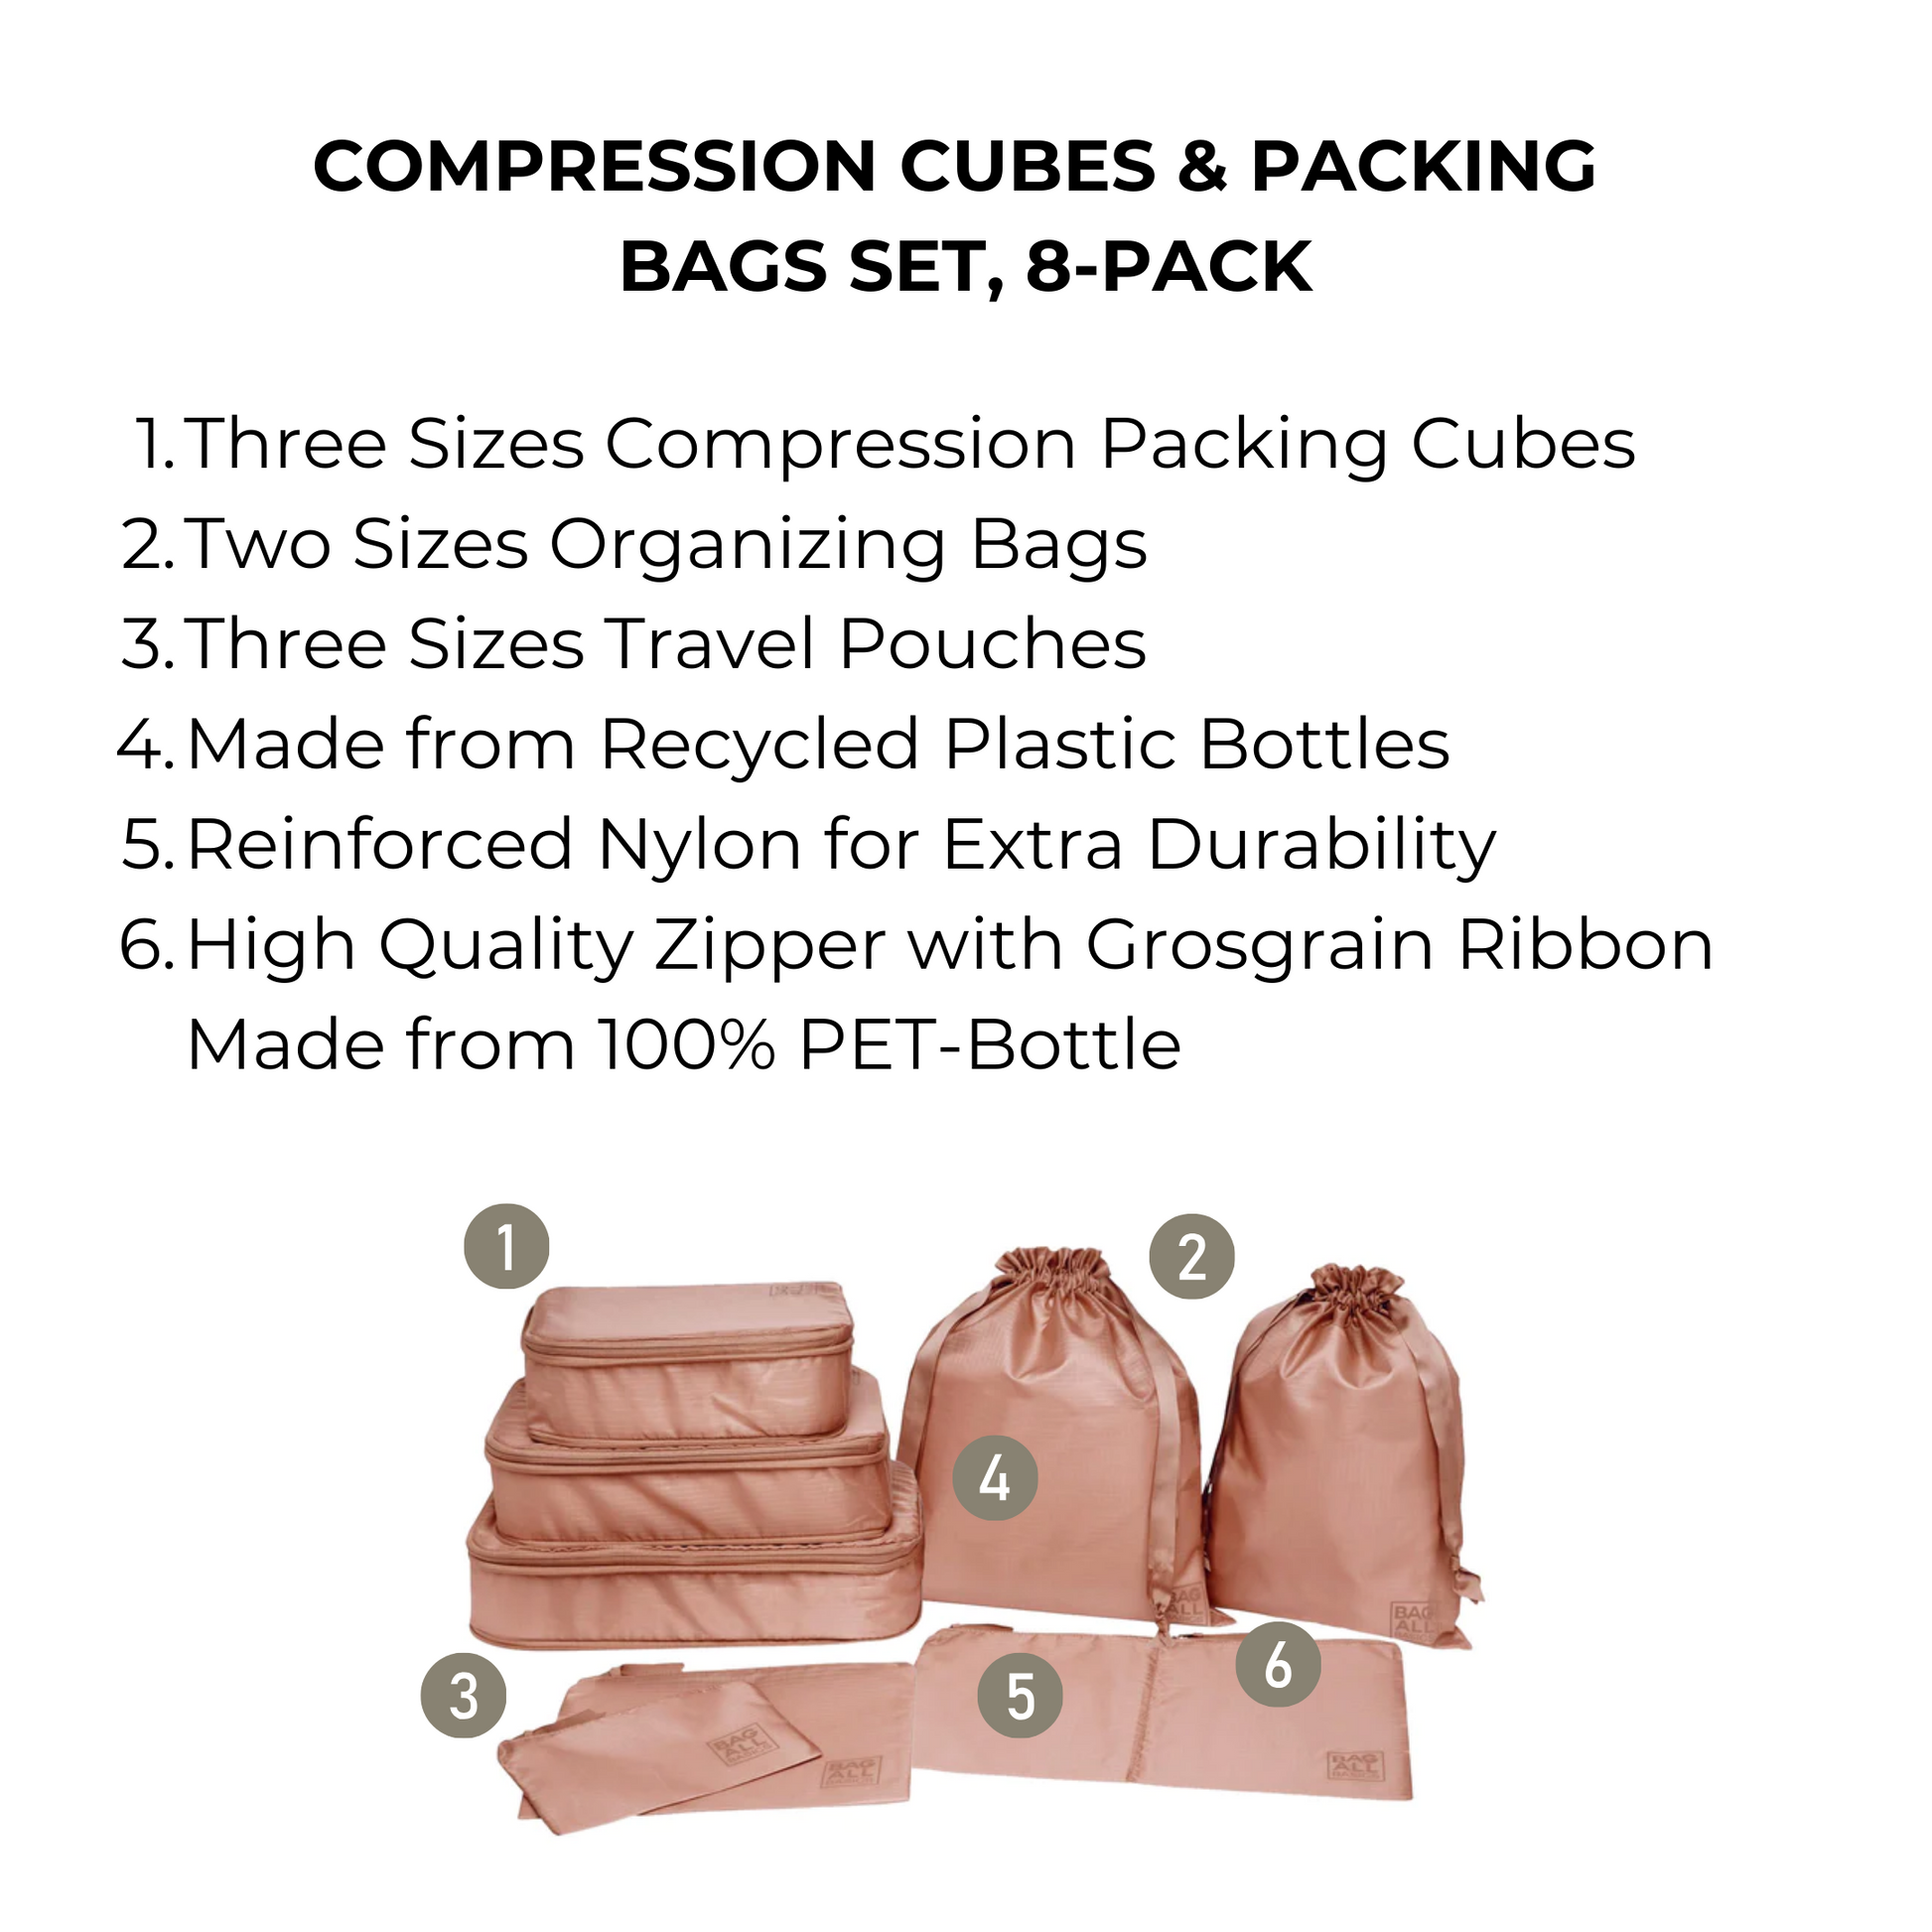 Compression Cubes & Packing Bags Set, 8-pack, Pink/Blush | Bag-all